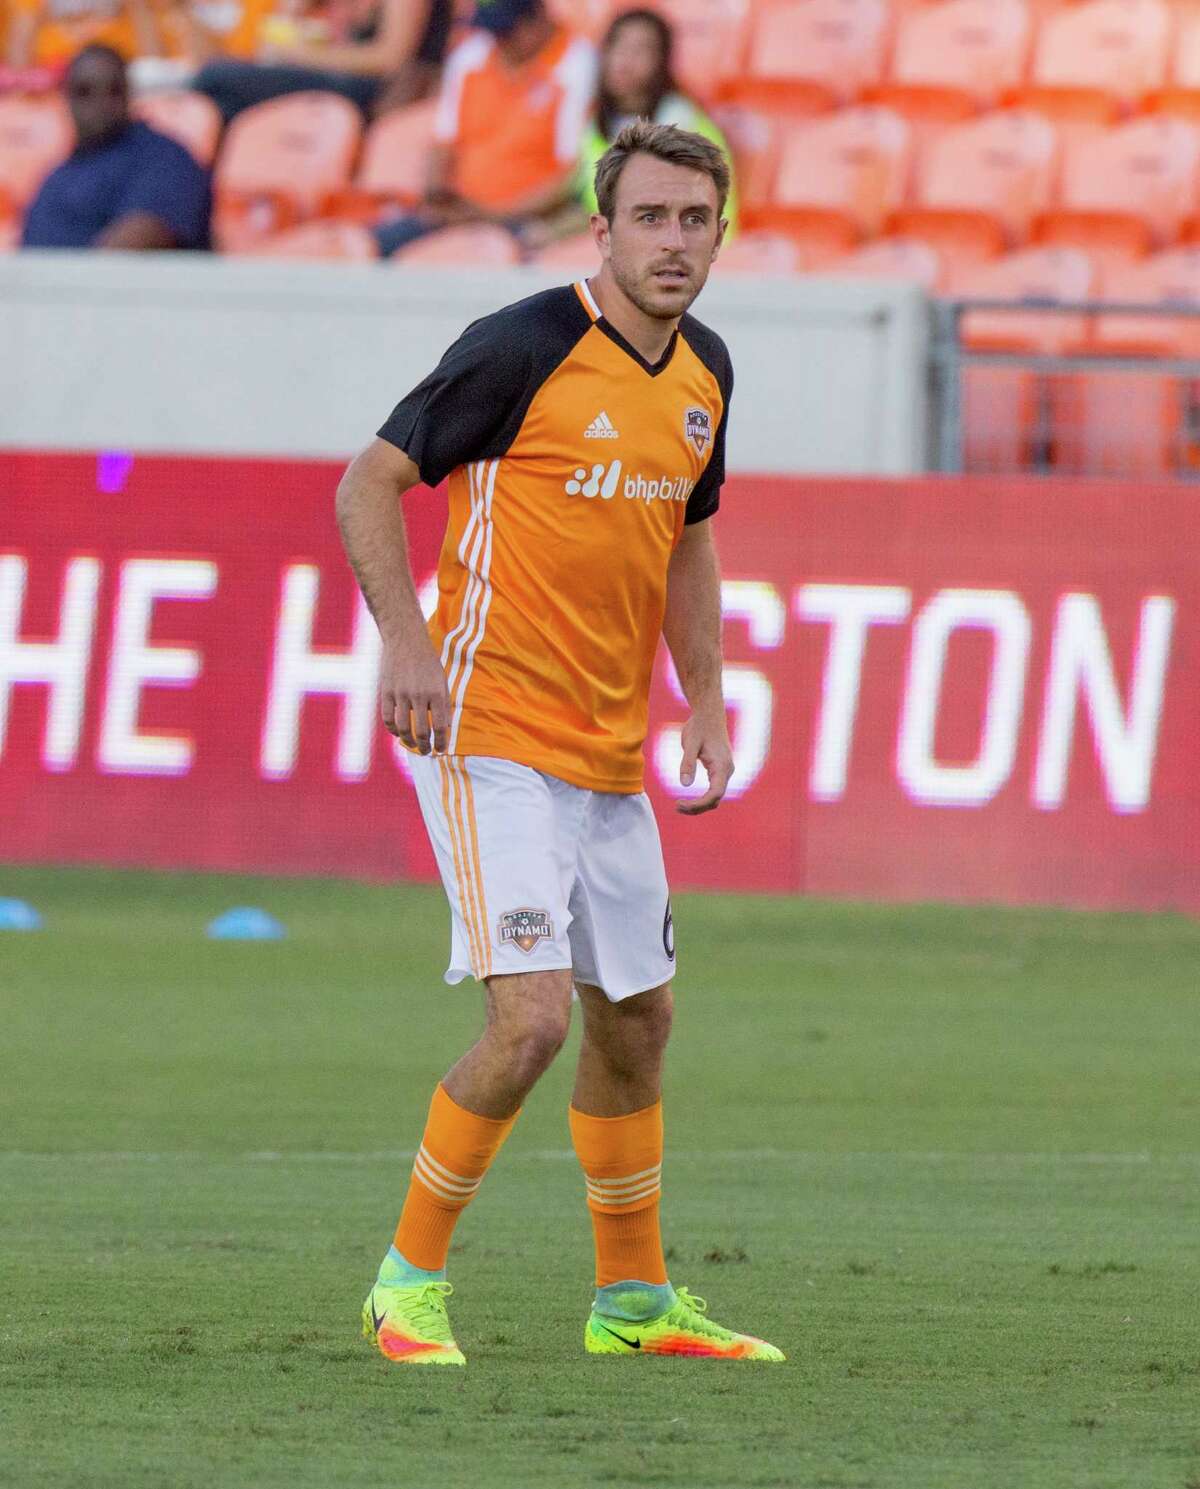 Houston Dynamo midfielder David Rocha (6) on the field during practice before action between the between the Houston Dynamo and the San Jose Earthquakes during an MLS soccer game at BBVA Compass, Sunday, July 31, 2016, in Houston. (Juan DeLeon/for the Houston Chronicle)